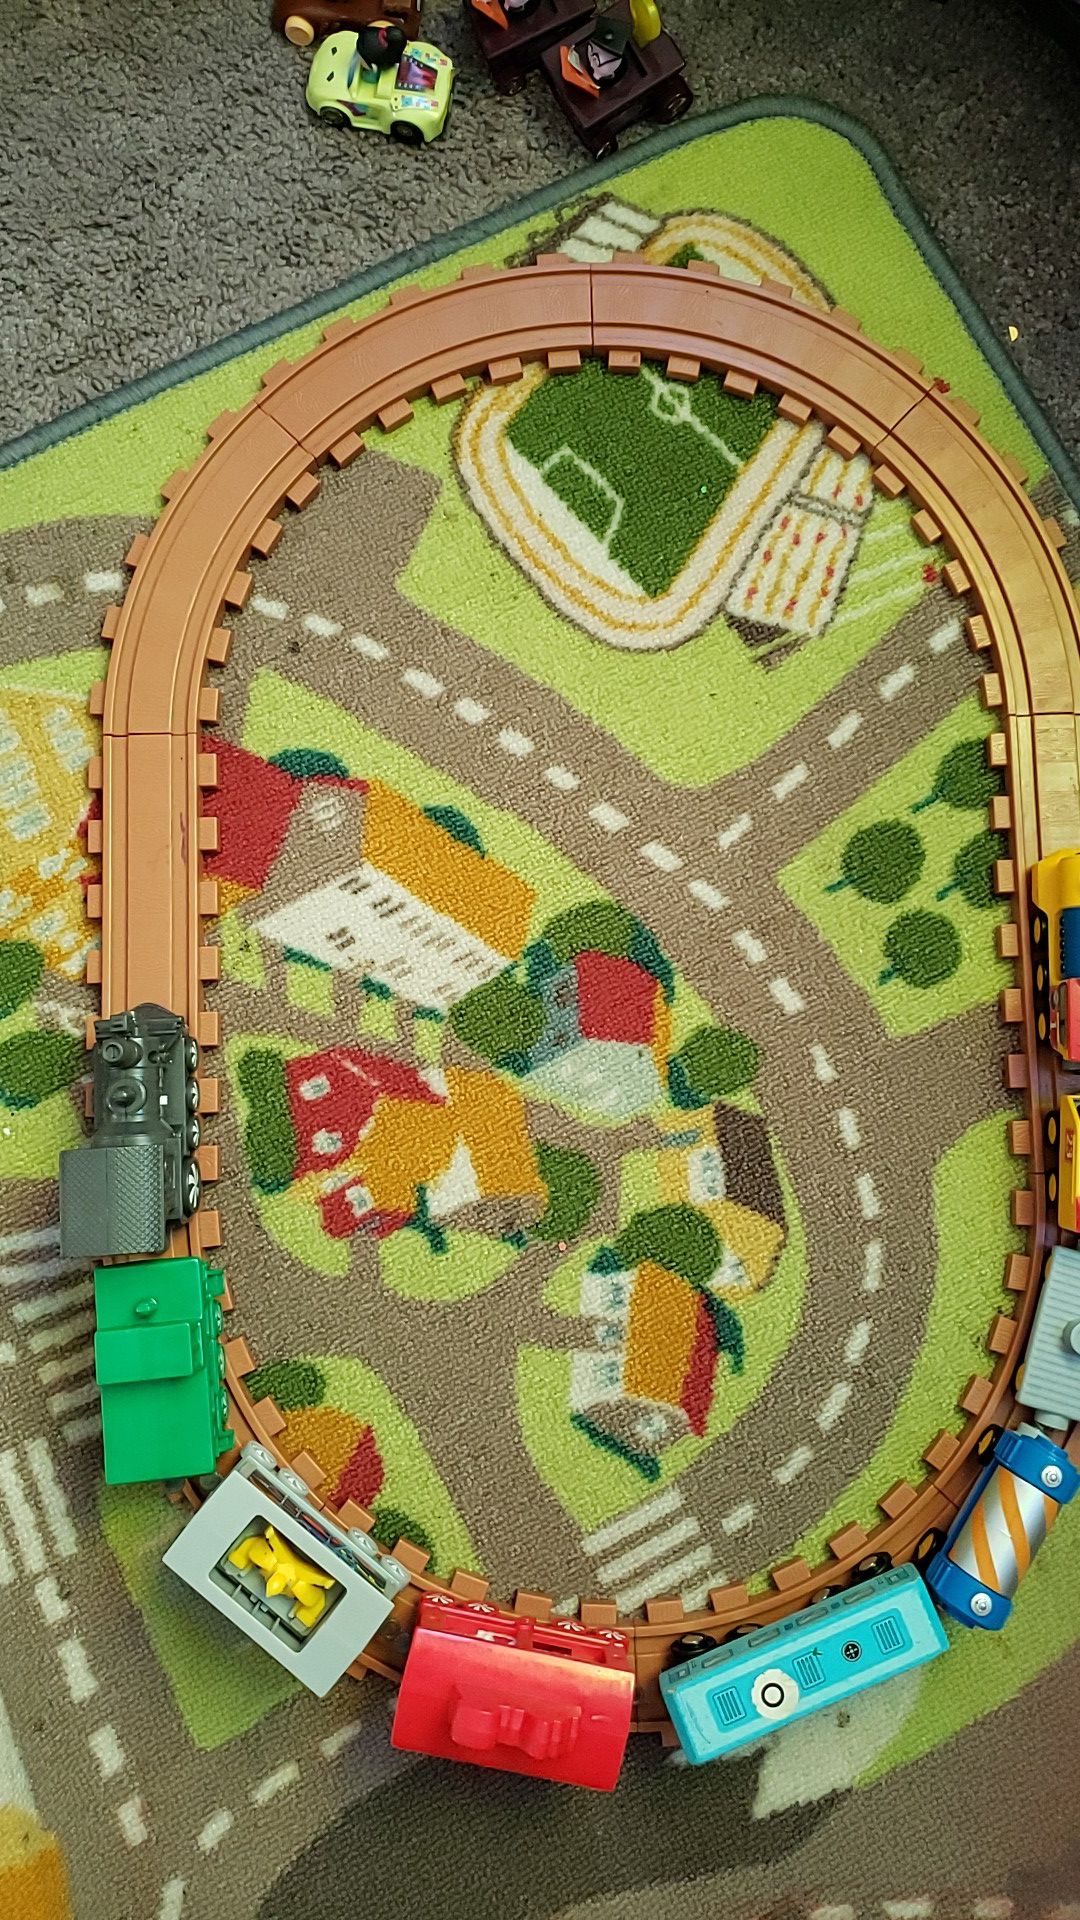 Train Tracks with Trains makes noise Kids Toys